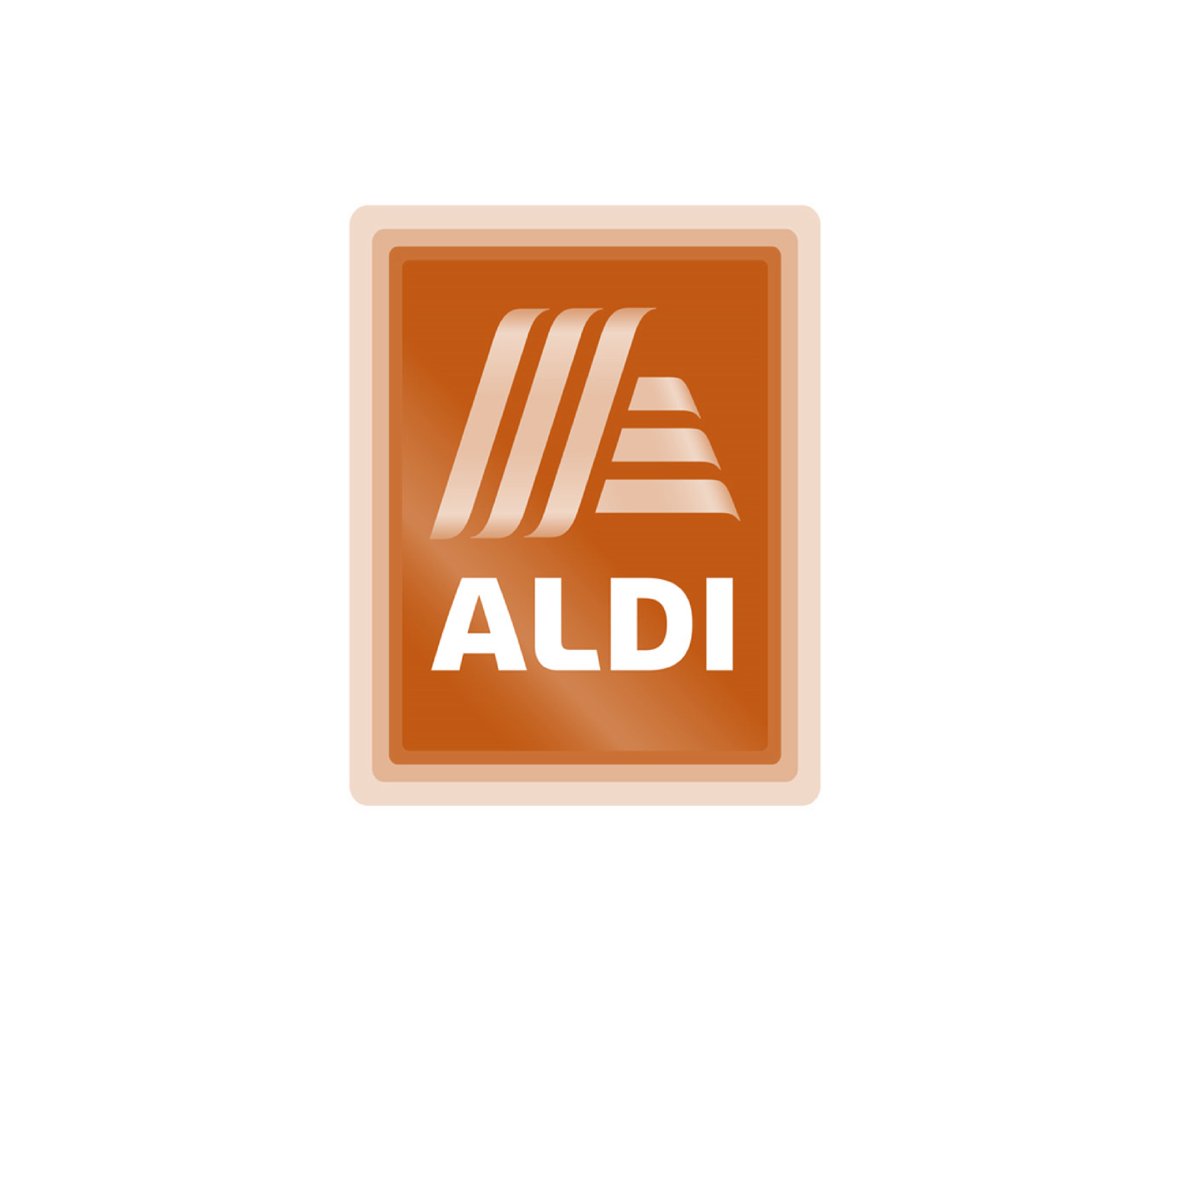 I'm not allowed to browse the middle aisle of Aldi when I'm shopping, I always come home with something 'I didn't know I needed' - often, I never needed it. It was just immediate gratification. We explore how & why on our blog: theagileworks.com/blog #aldi #convenienceculture